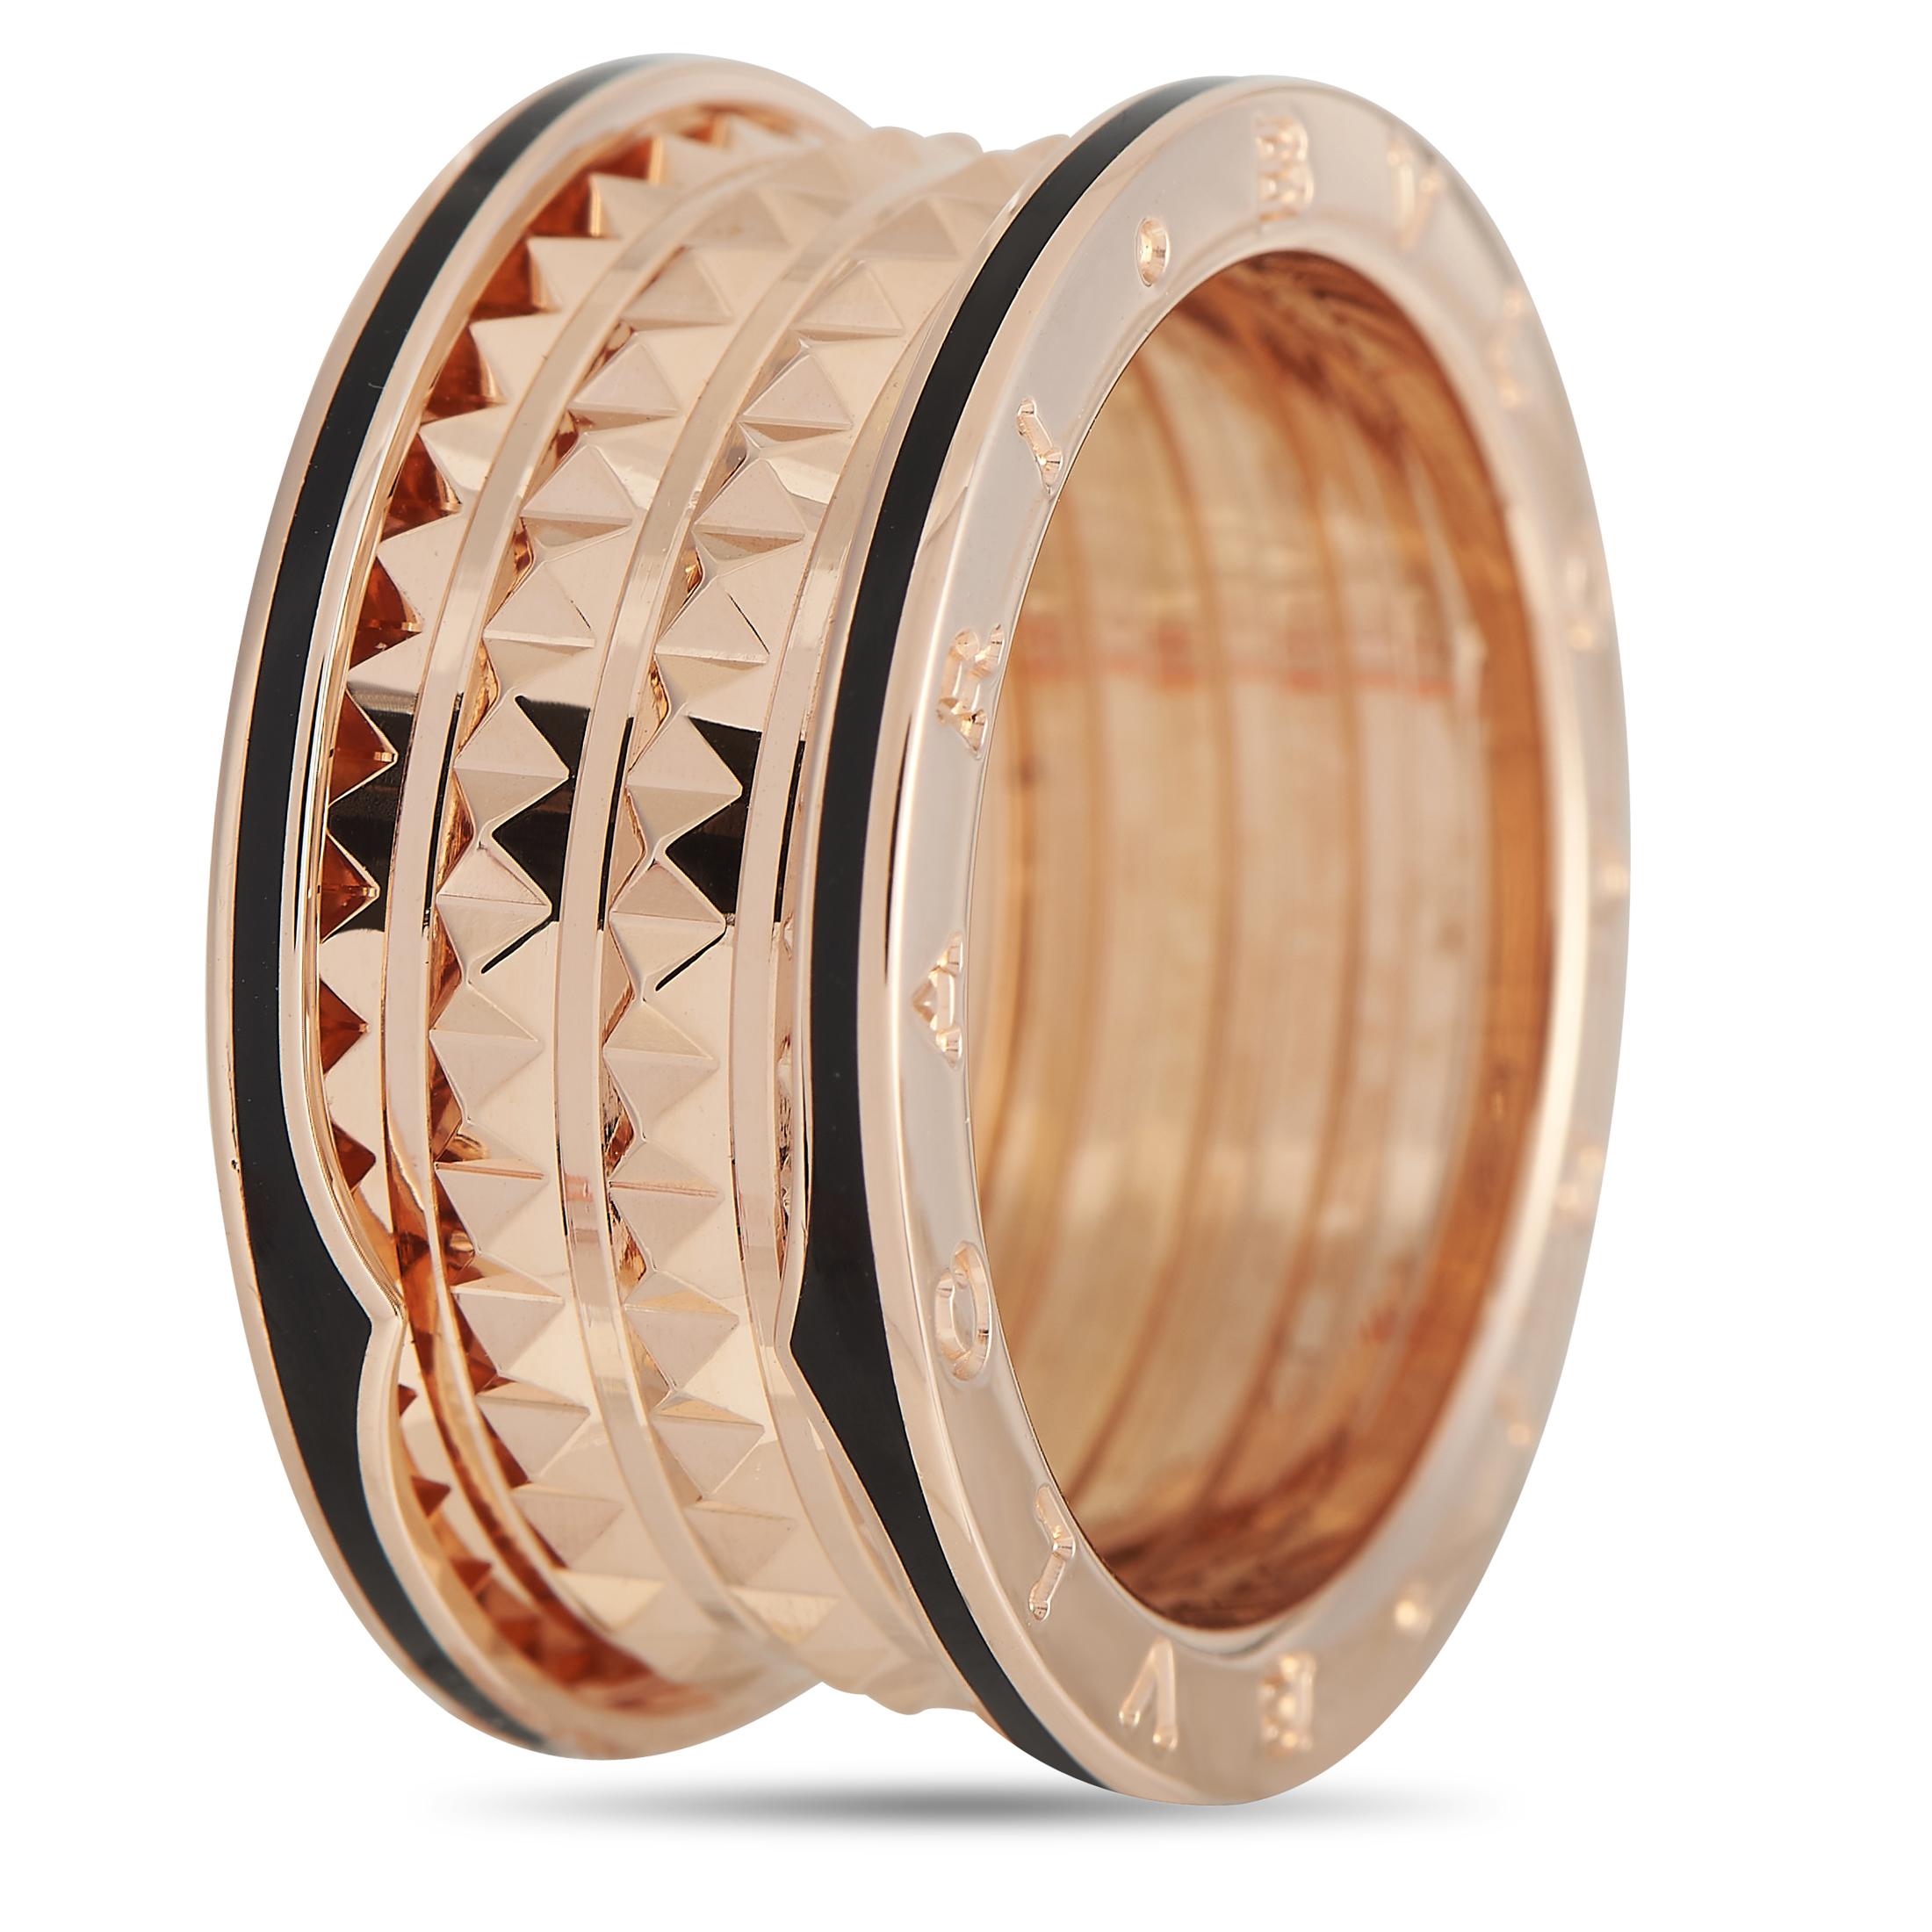 This exquisite Bvlgari B.zero1 band ring is full of unforgettable details. Textured metal at the center of the design is elevated by black ceramic accents, while the luxury brands distinct signature makes a statement on each end. Its crafted from